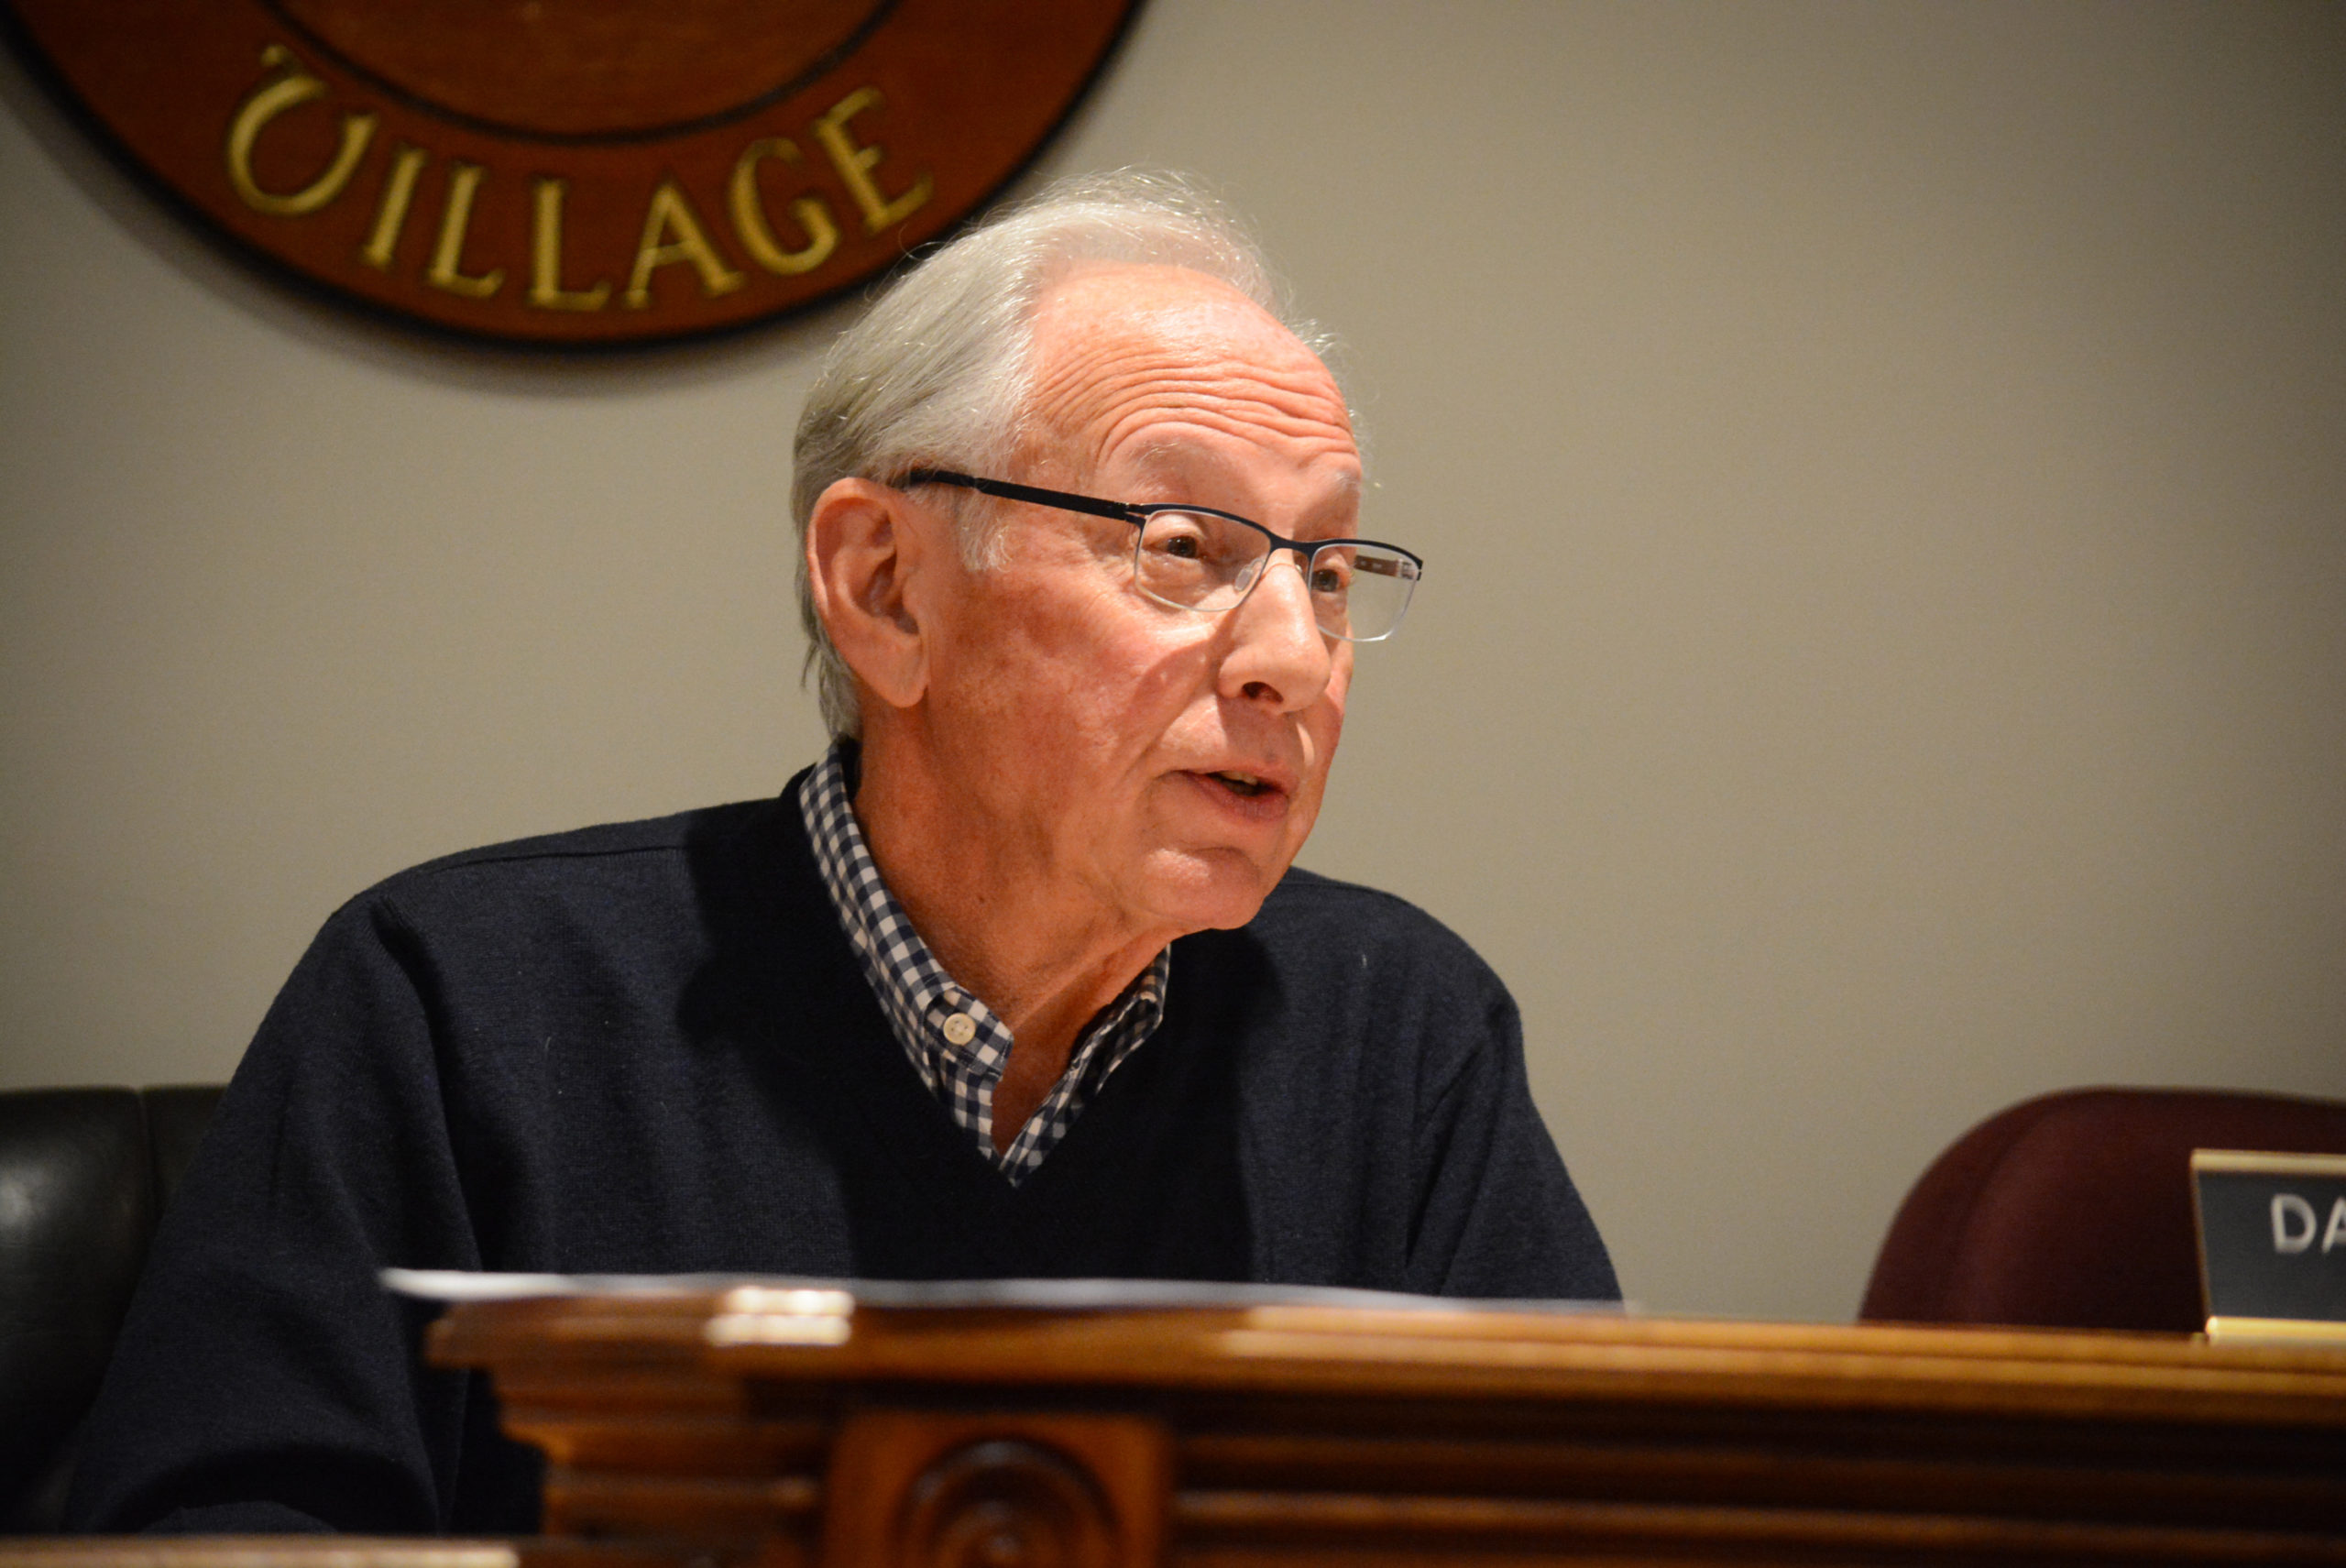 Deputy Mayor David Miller discussed speed limits, smoke detectors, LED lights and other topics at Russell Gardens' Board of Trustees meeting on Thursday night. (Photo by Janelle Clausen)